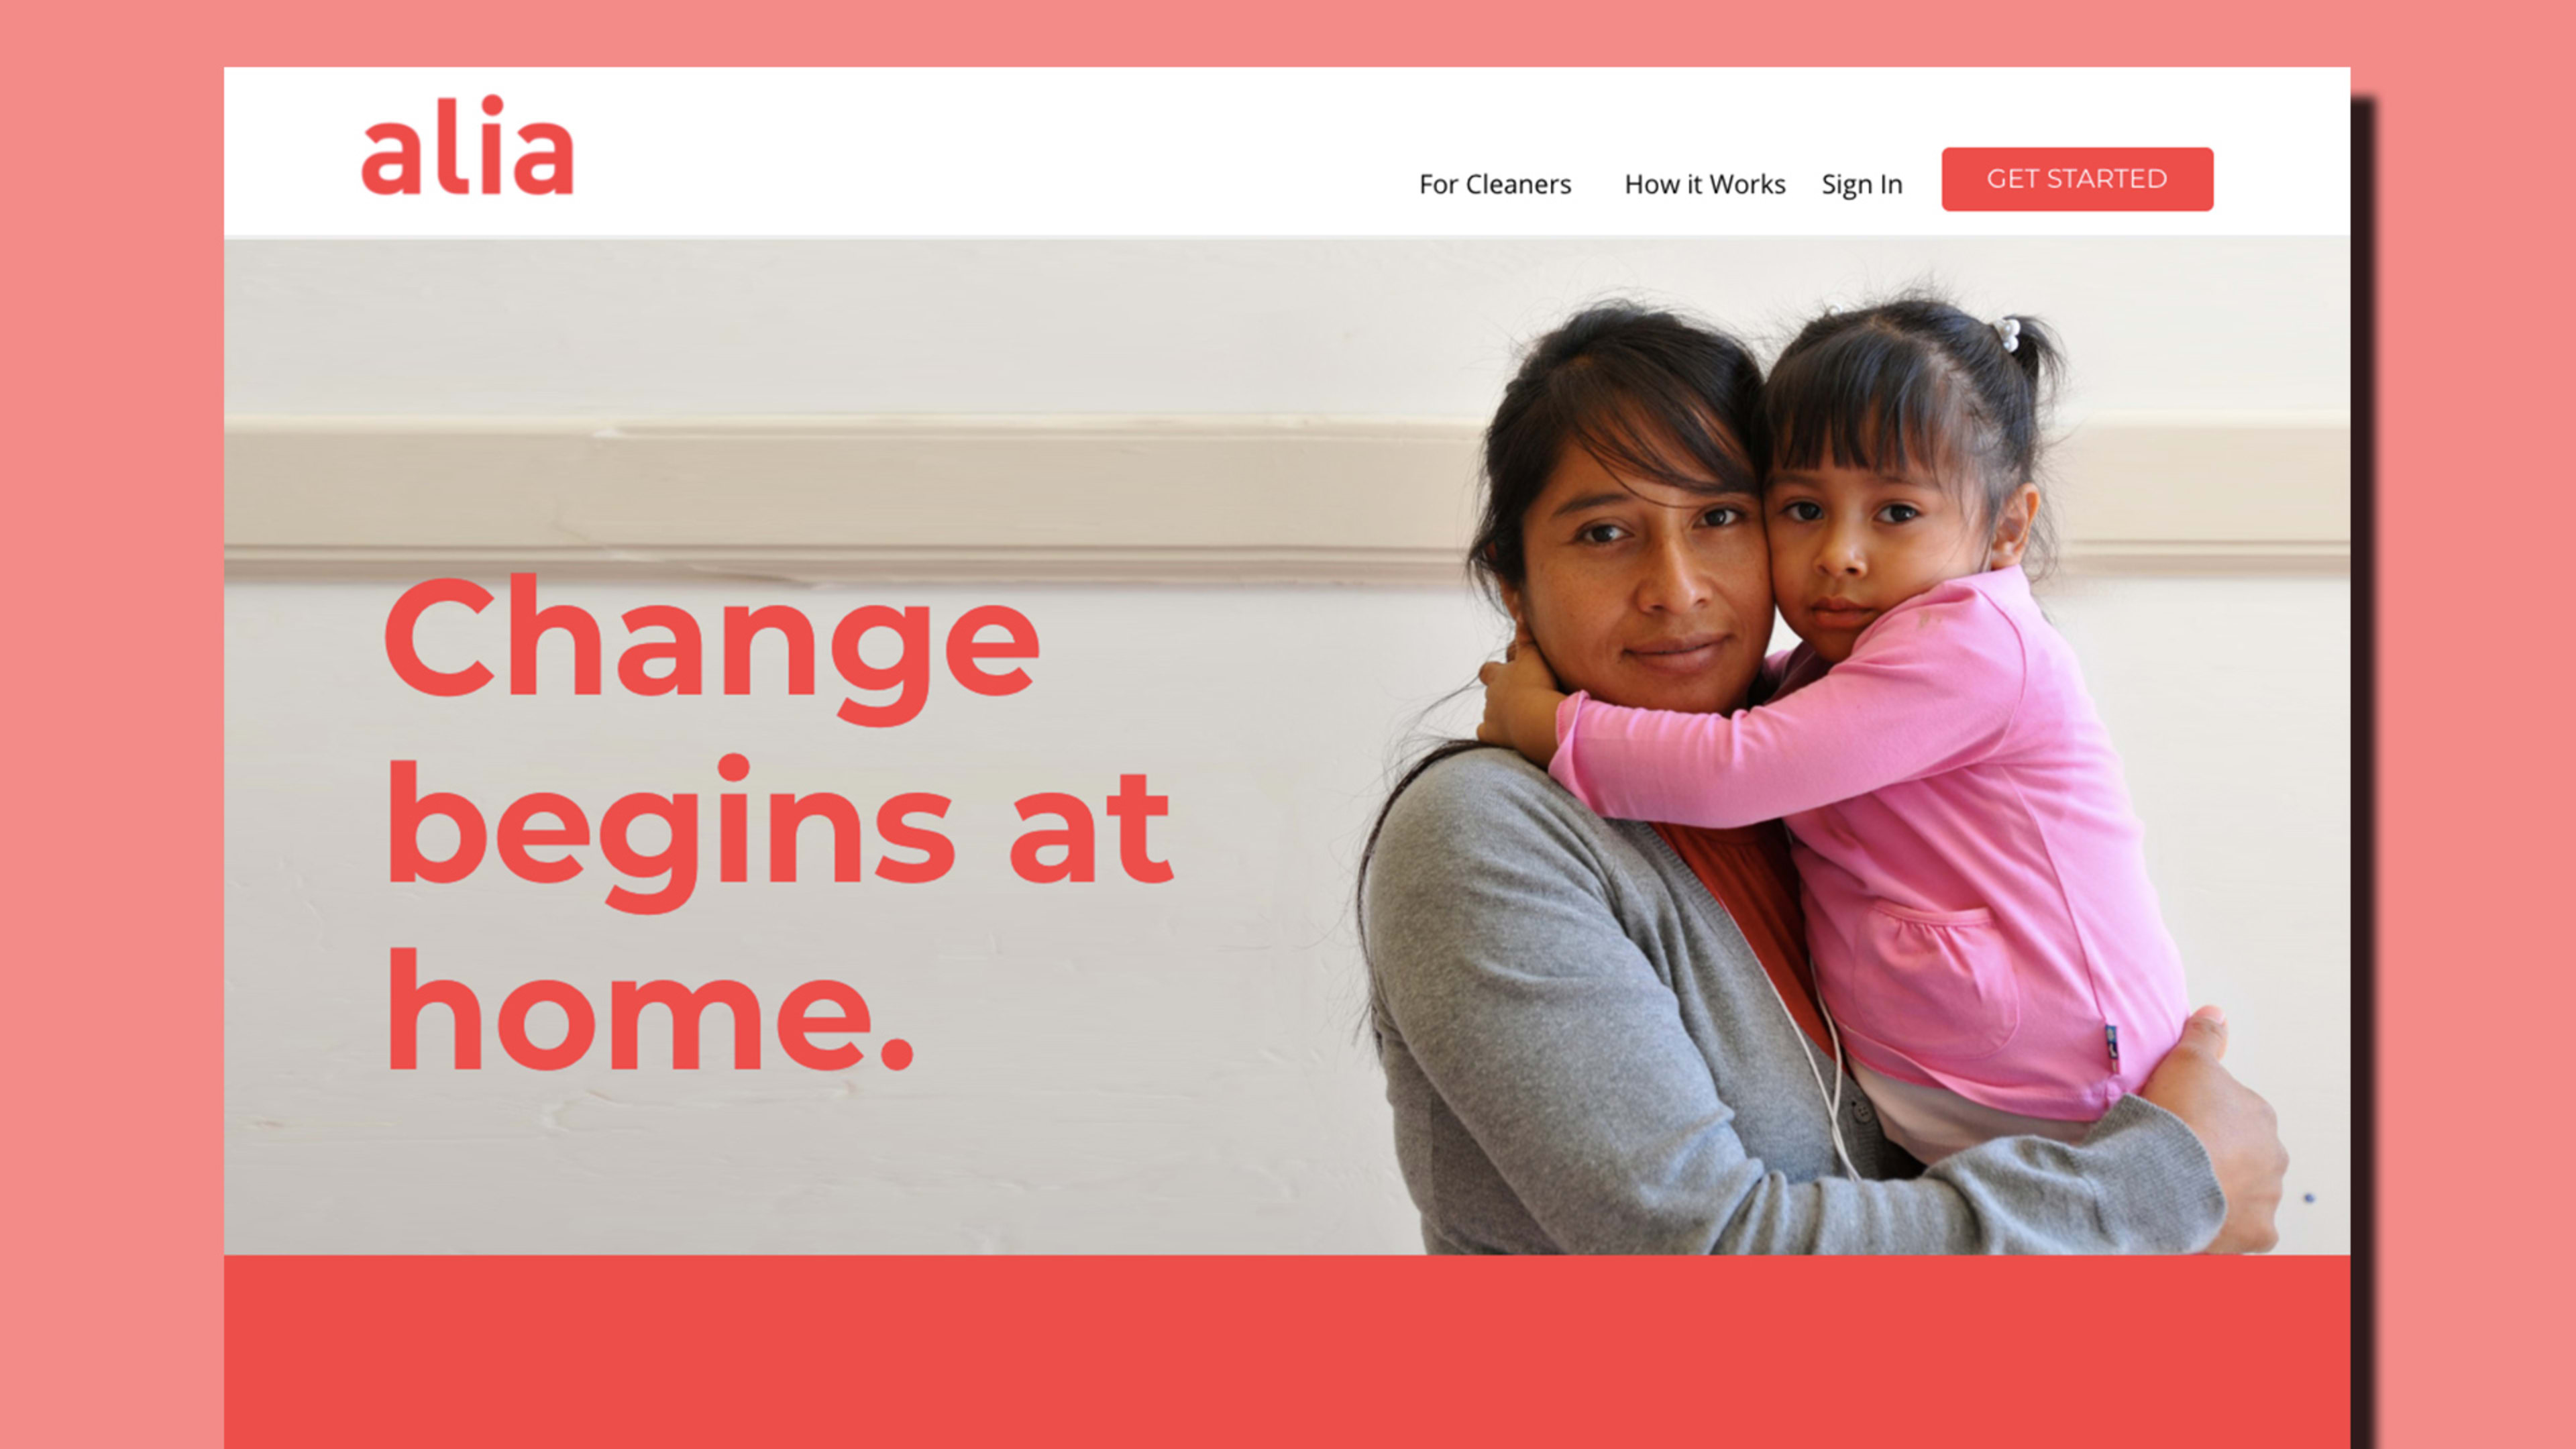 This new service gives domestic workers a way to get benefits and paid time off